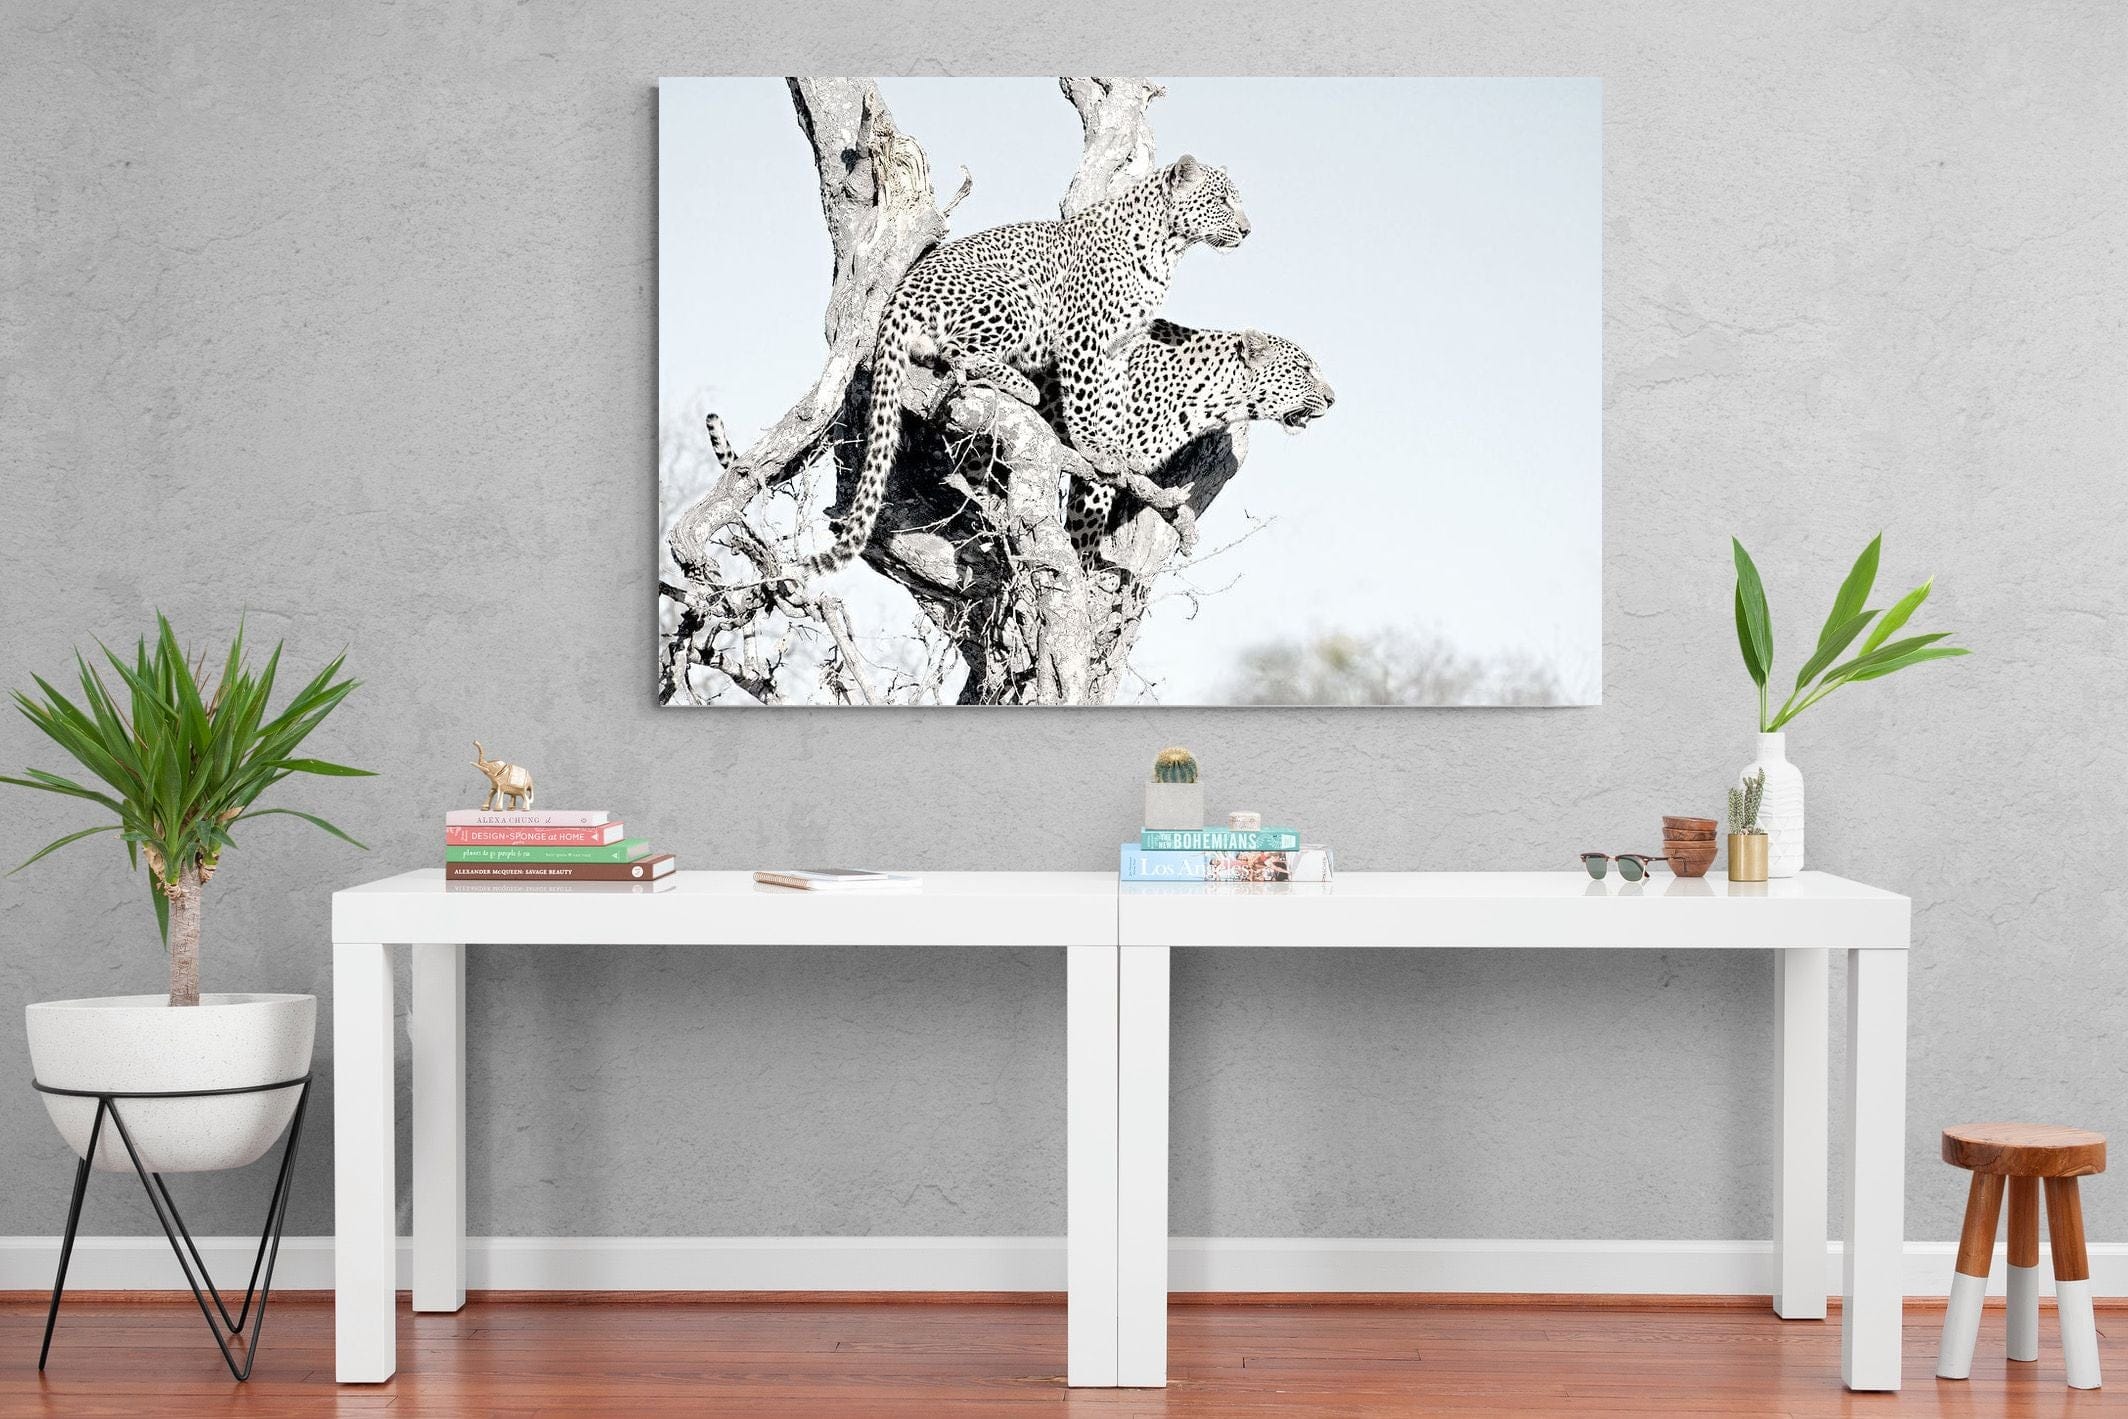 Poised Leopards-Wall_Art-150 x 100cm-Mounted Canvas-No Frame-Pixalot